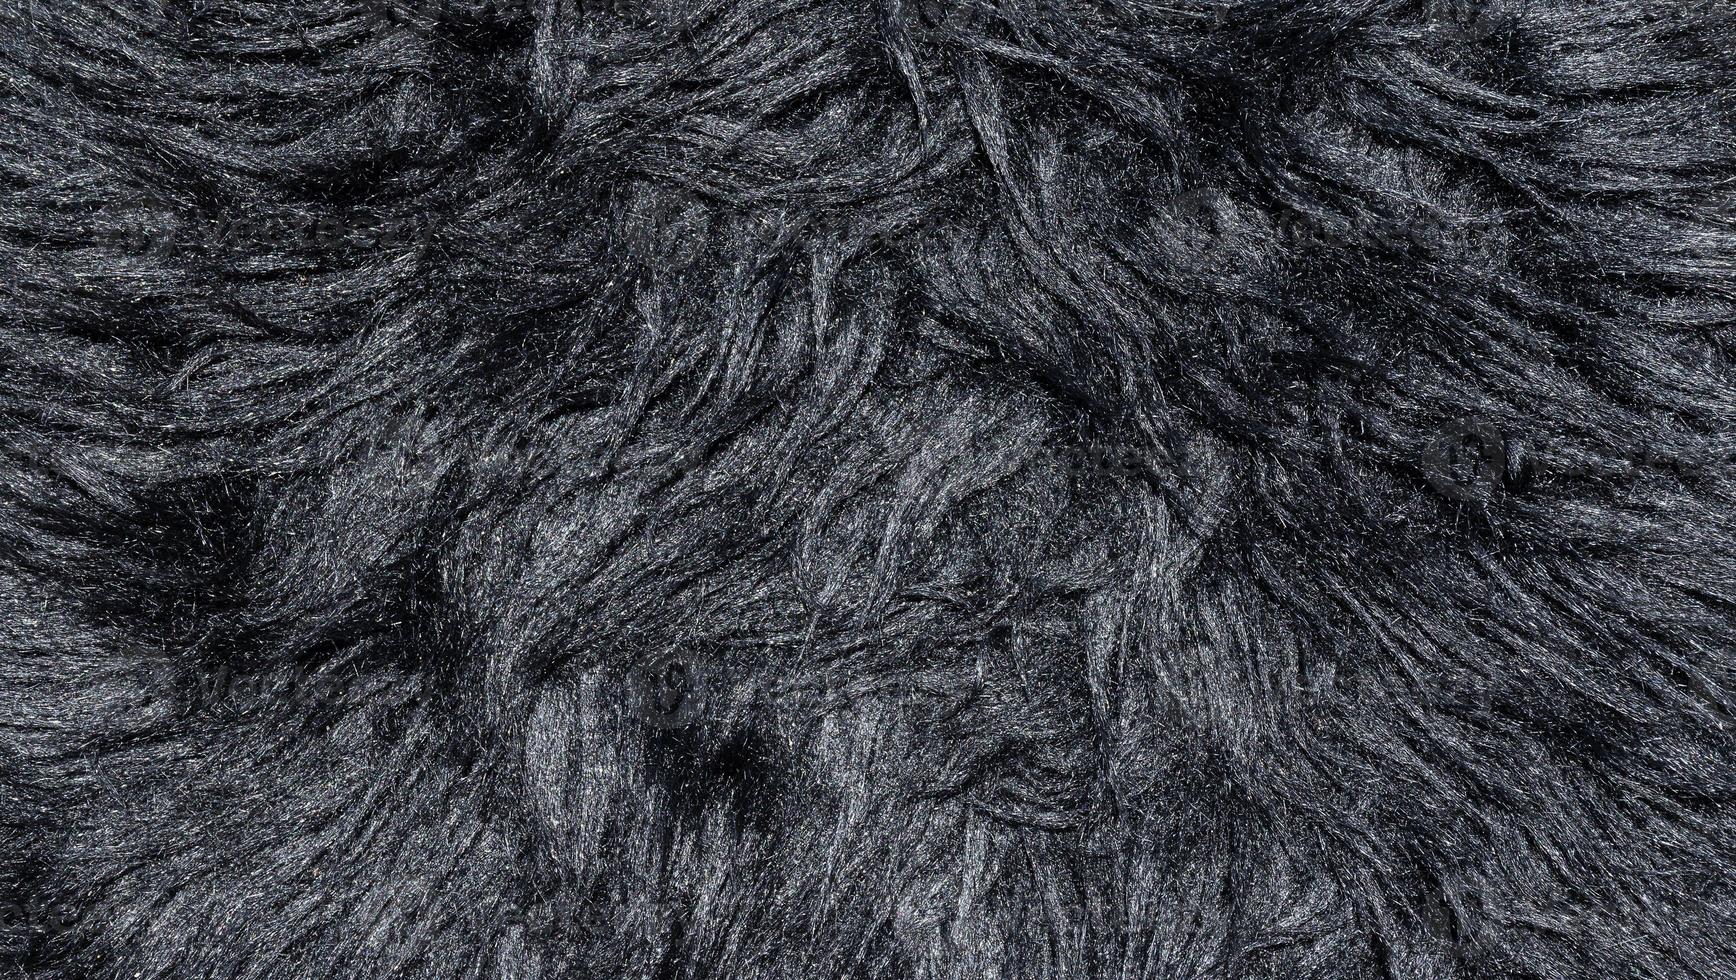 Black wool rug texture background 11840387 Stock Photo at Vecteezy